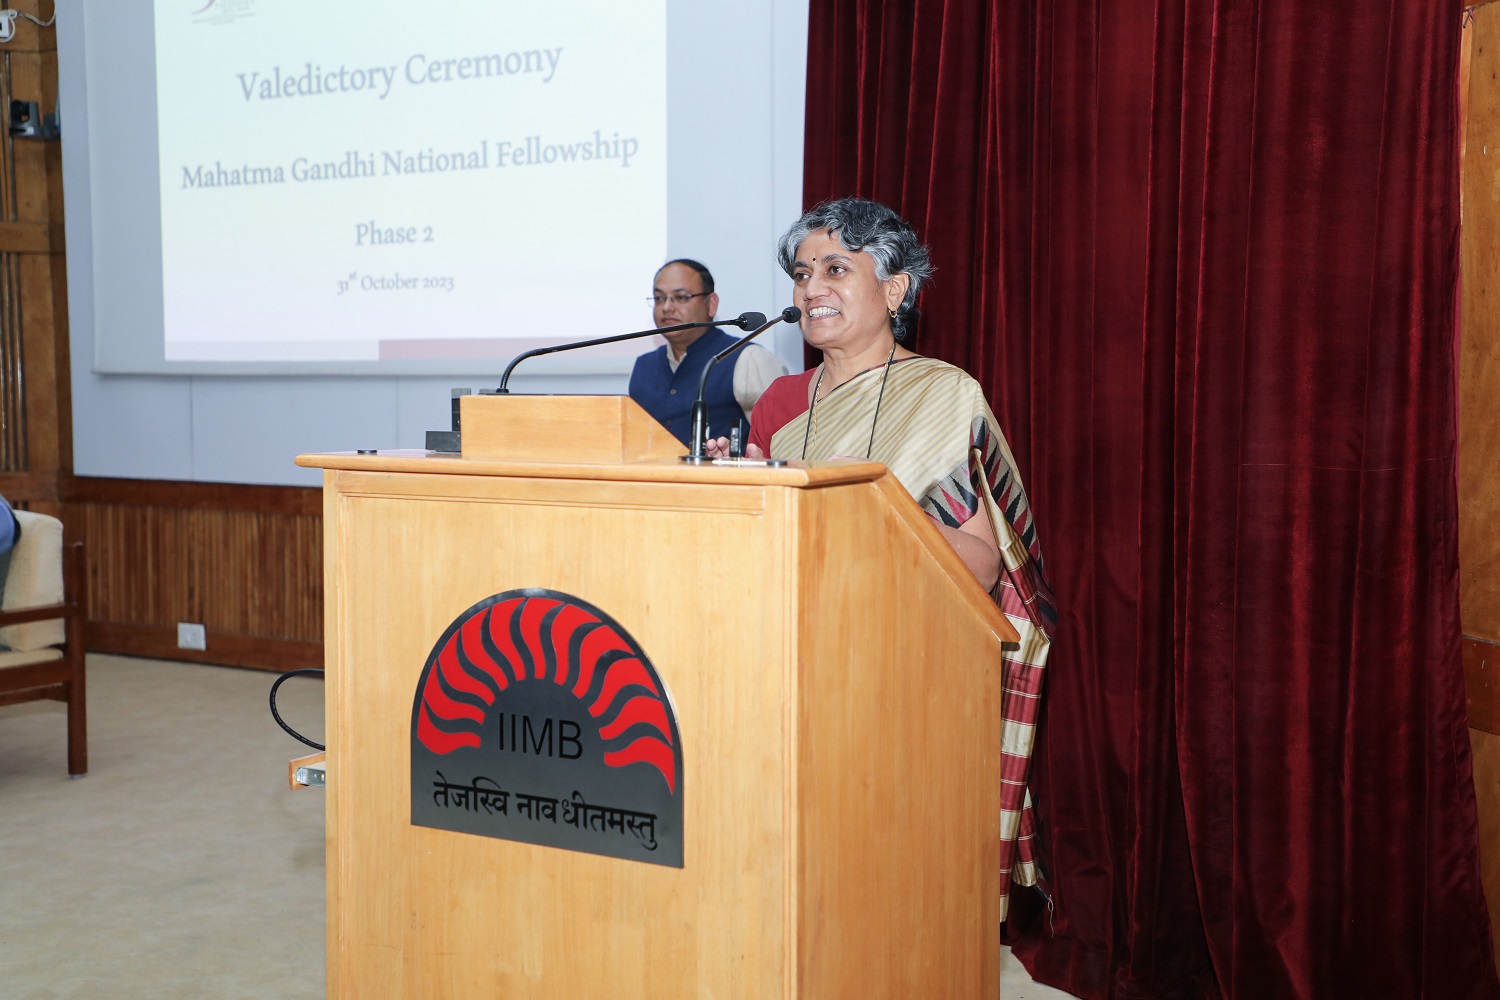 Prof. Rajalaxmi Kamath, Programme Director, MGNF, and faculty of the Public Policy area of IIMB, delivers the vote of thanks.